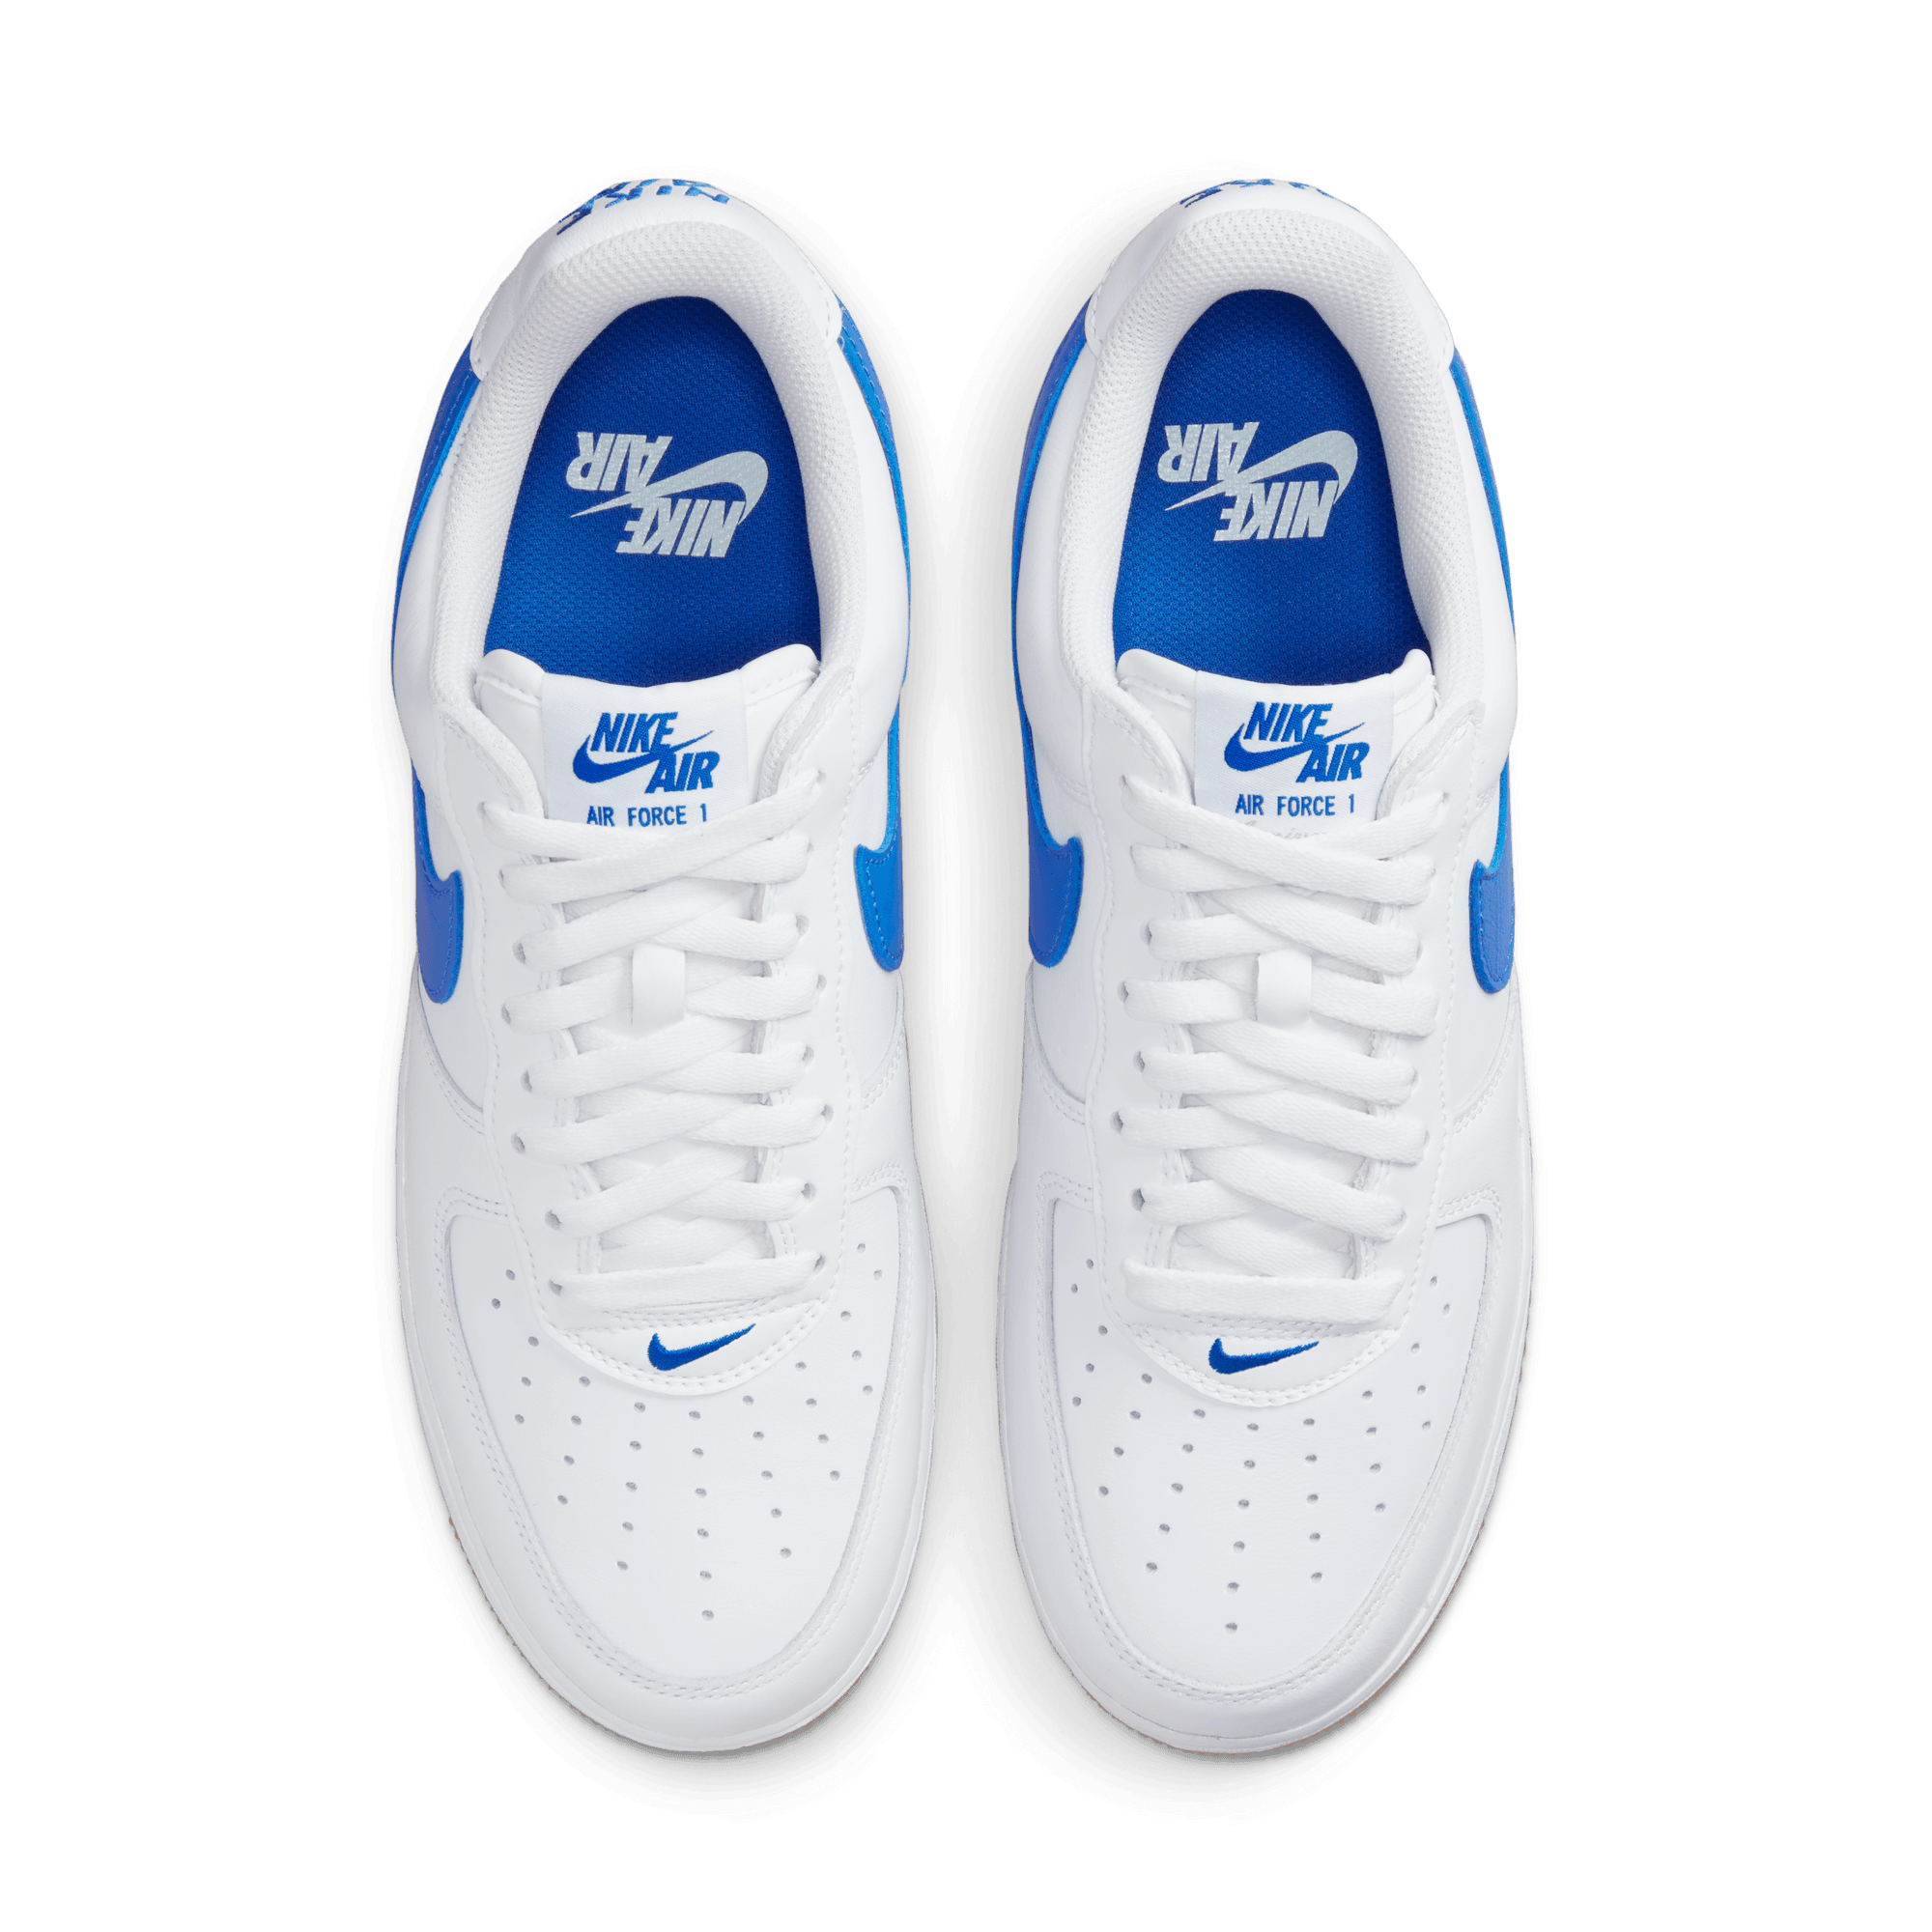 Air Force 1 Low Retro 'Color of the Month' - White/Royal Blue/Gum Yellow